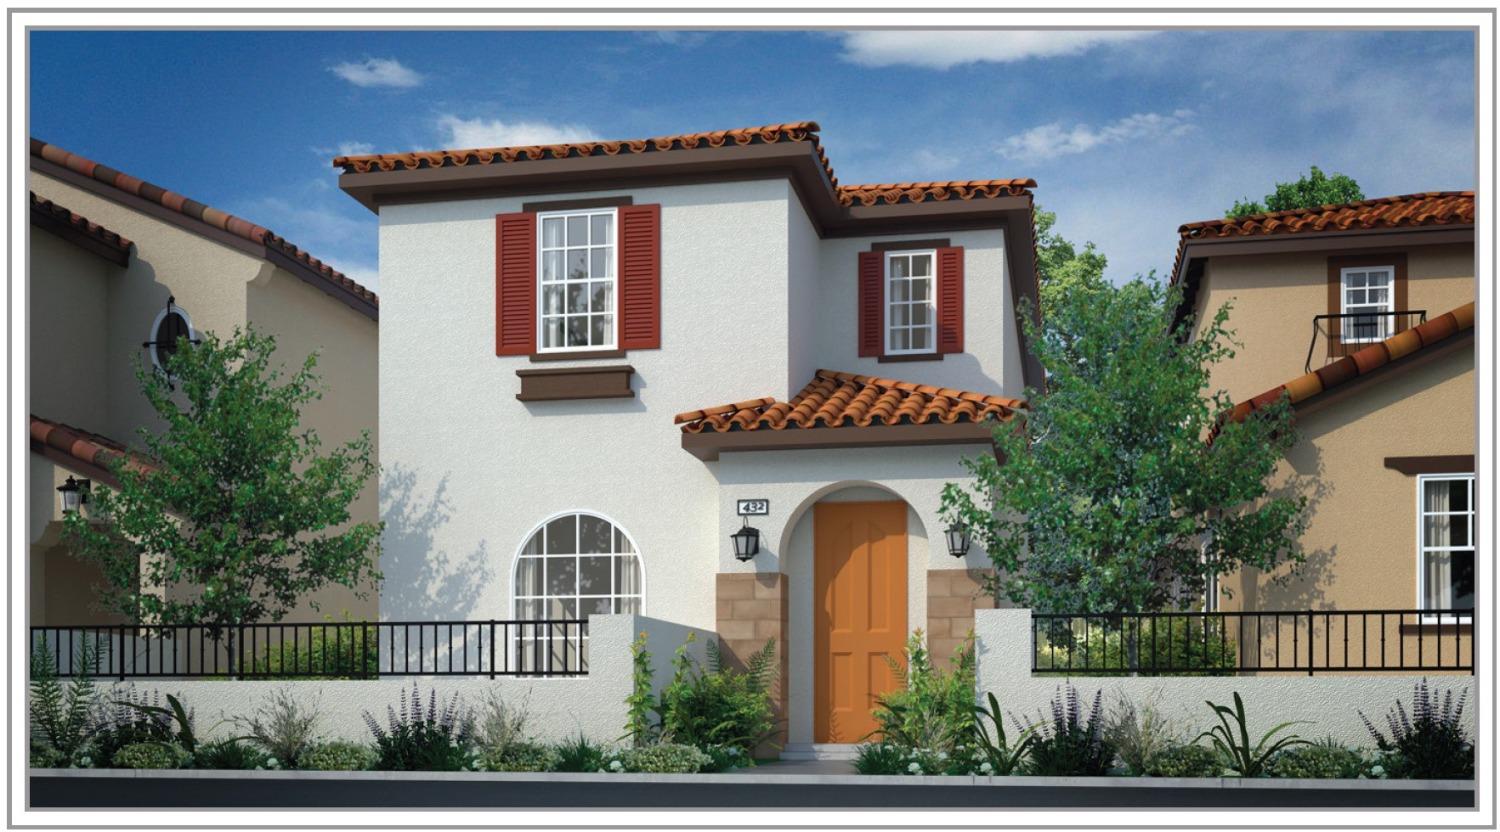 Here's an outstanding opportunity to own a brand-new Lennar home!! Perfect for first-time homebuyers